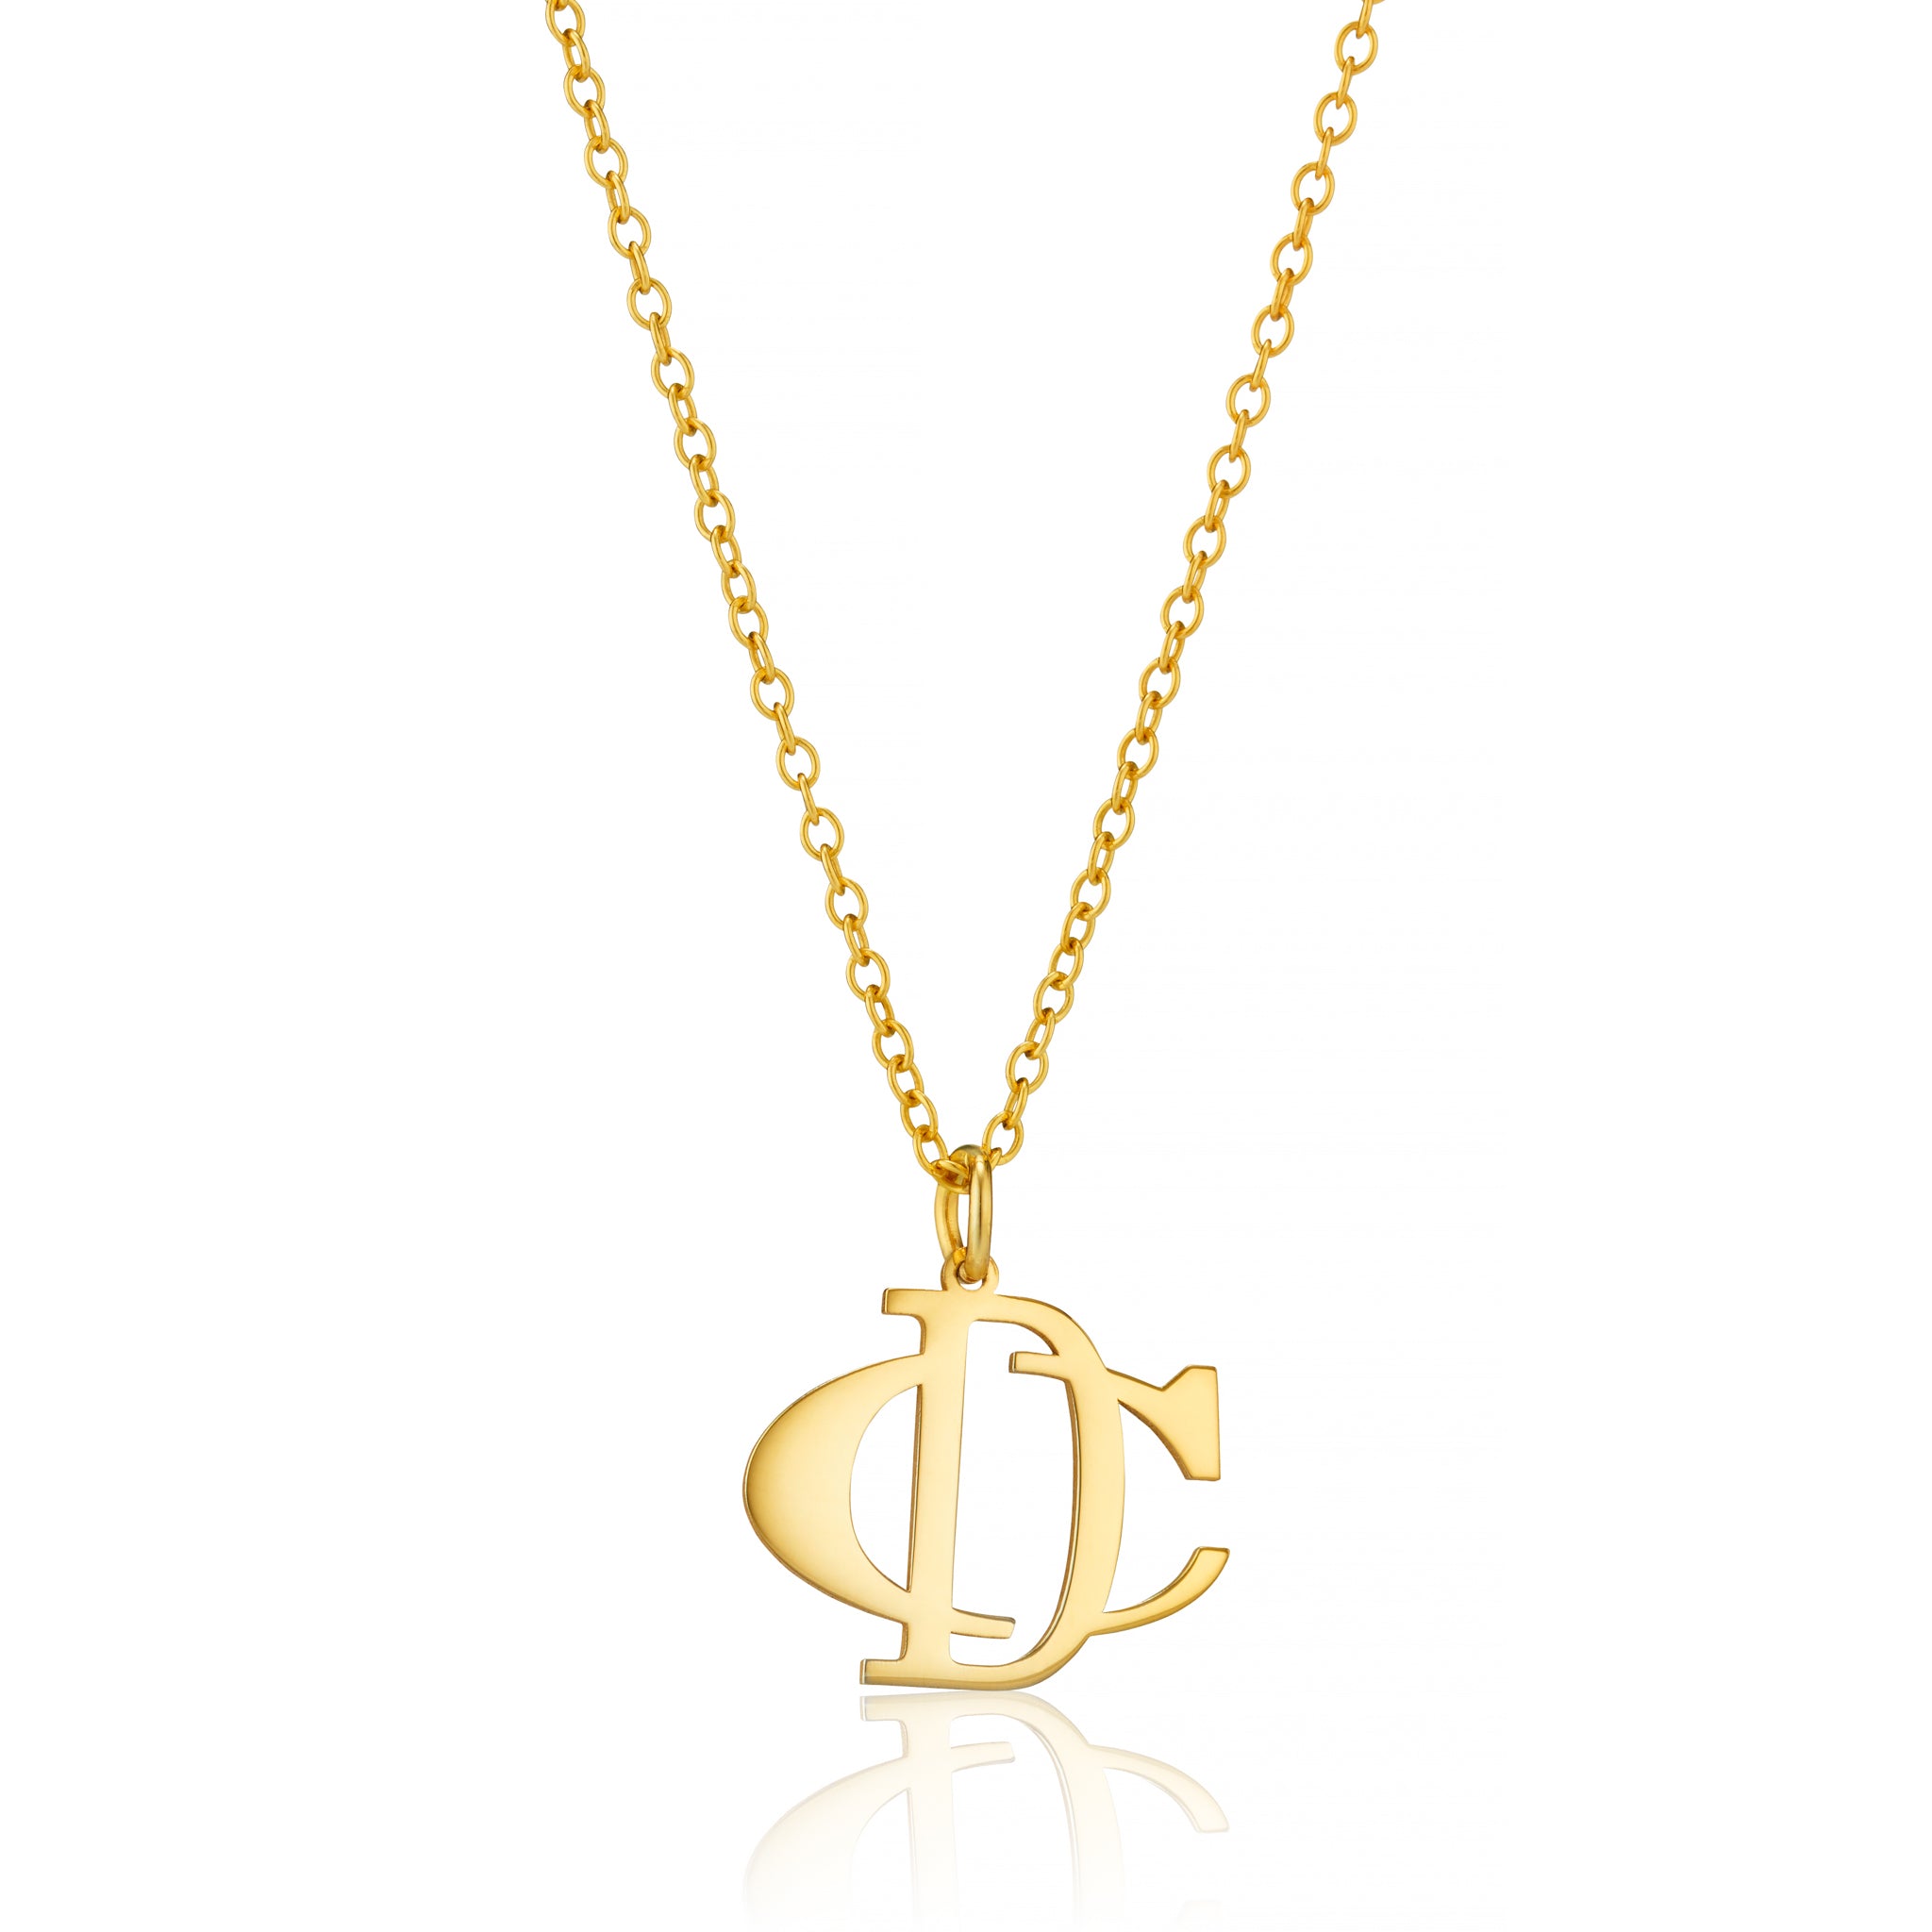 Personalised Double Initial Monogram Necklace